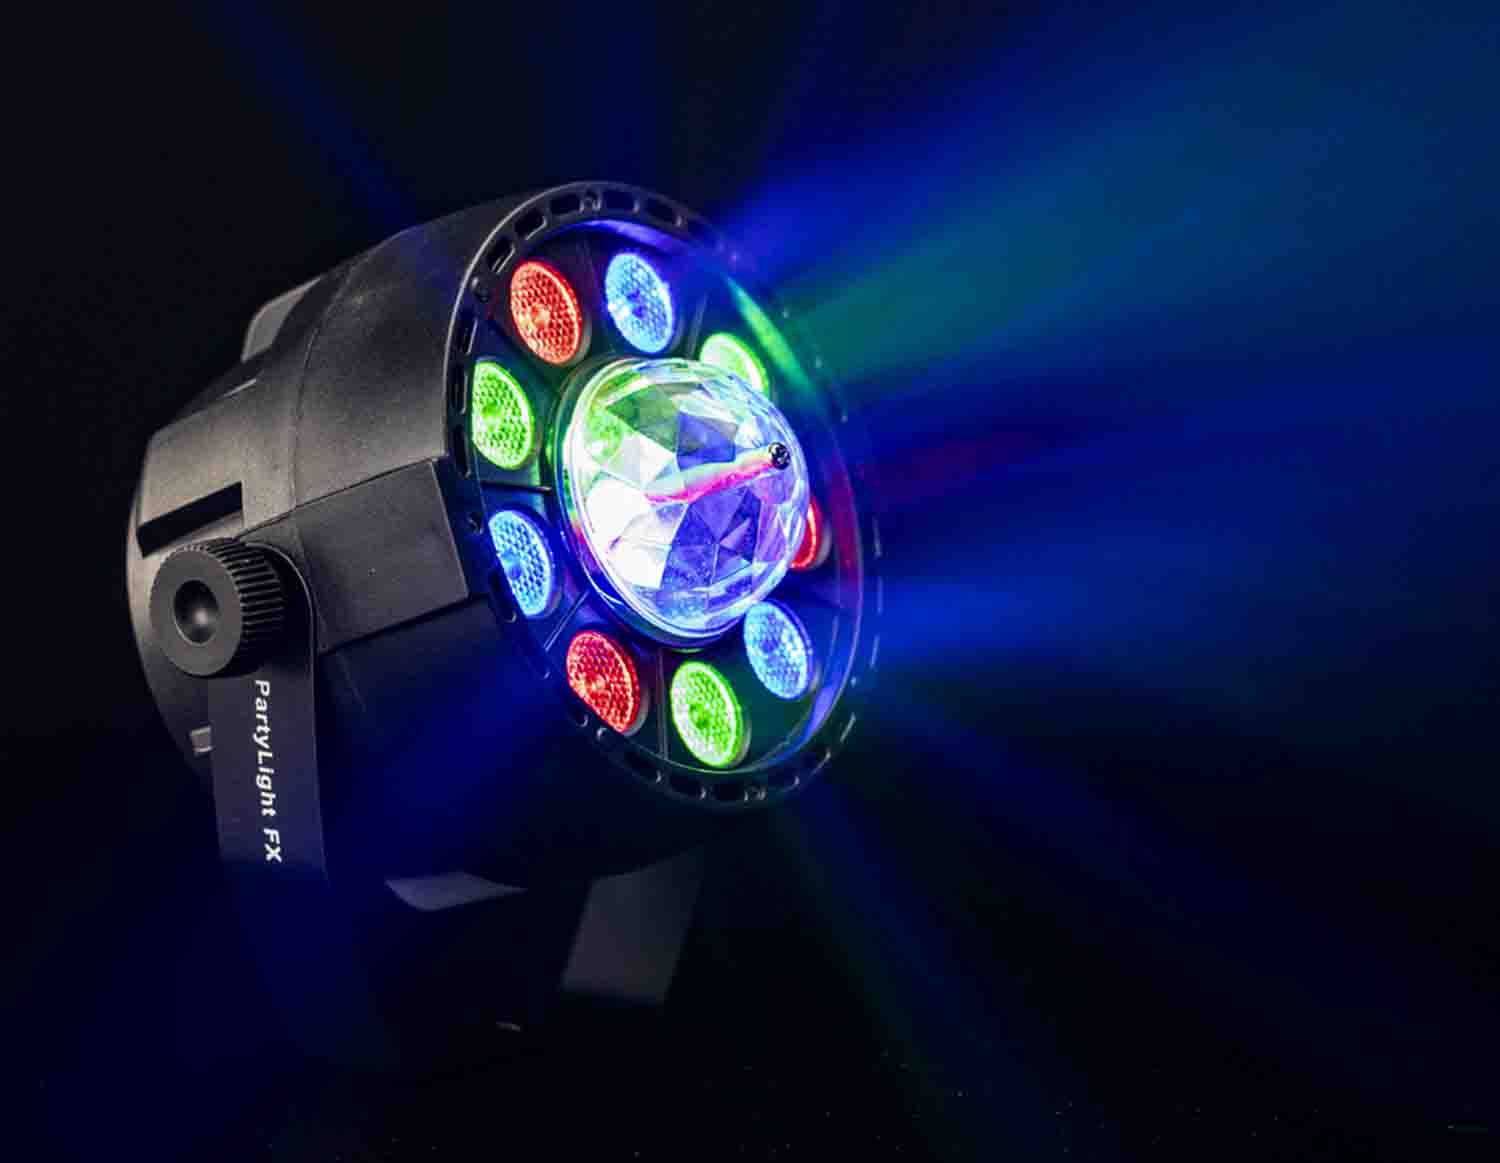 Colorkey Lighting Package with 3 Pack of CKU-1080 Party Lights - Hollywood DJ